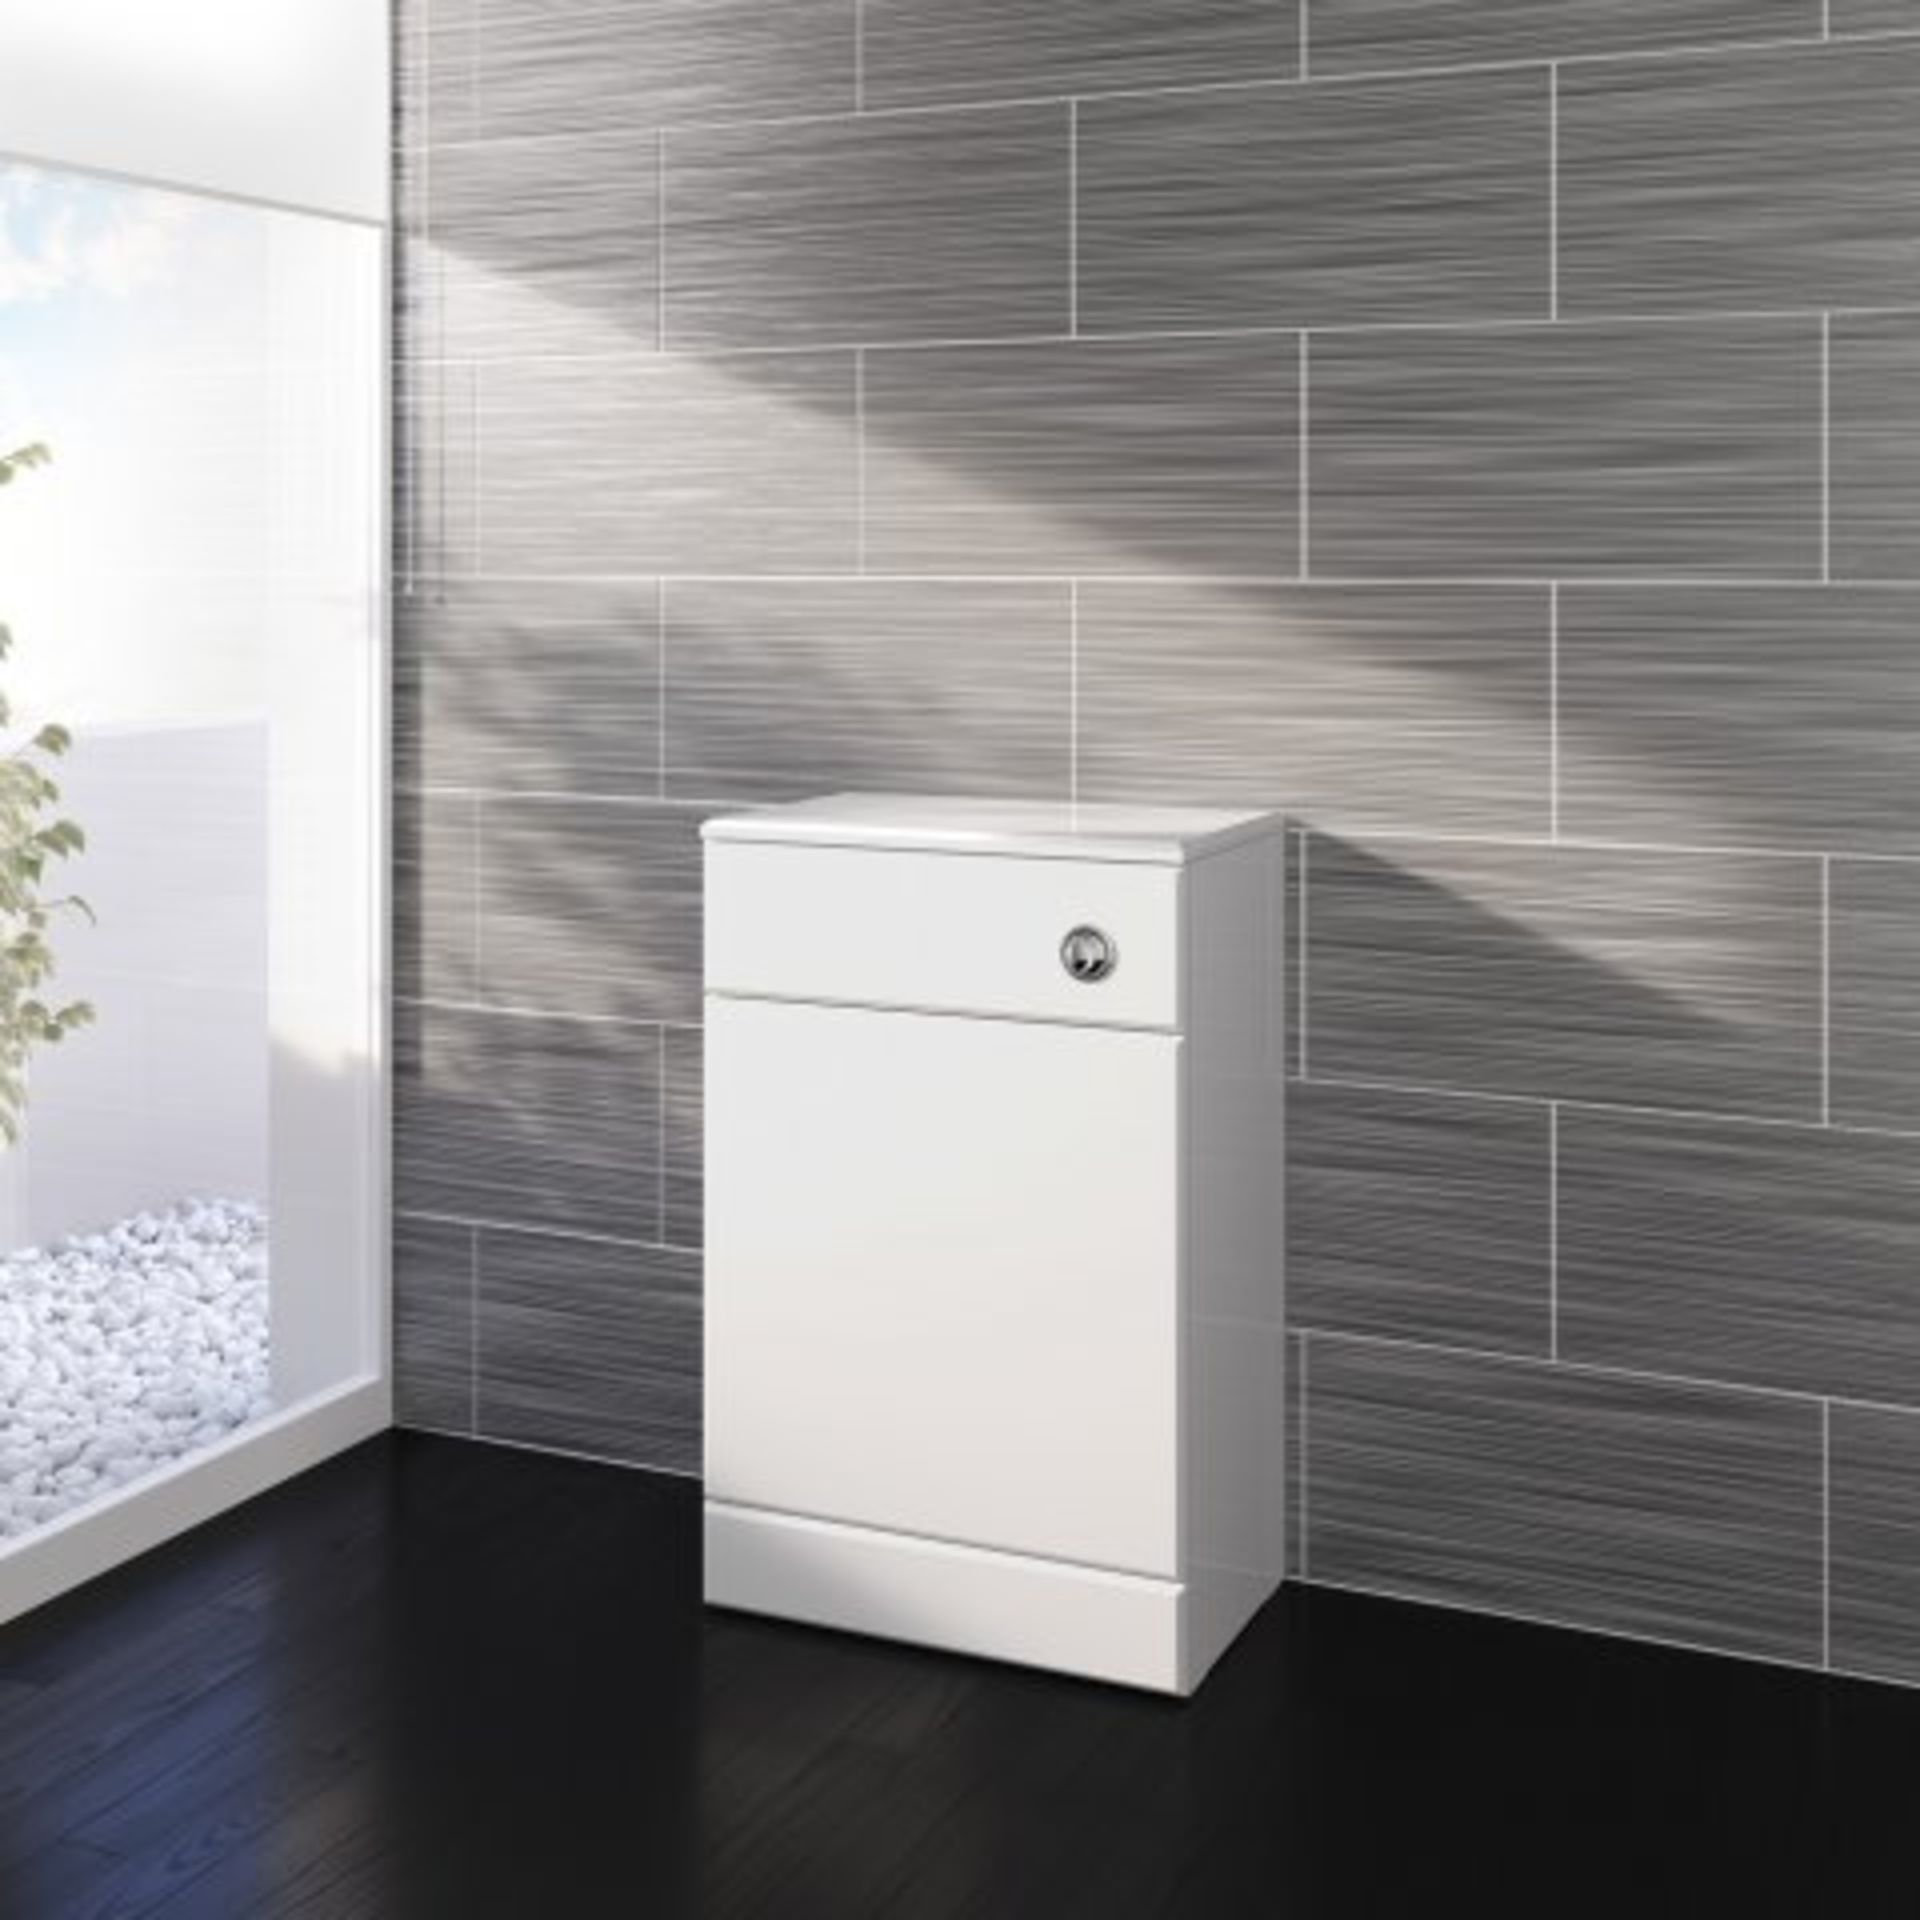 (AA19) 500x300mm Quartz Gloss White Back To Wall Toilet Unit. RRP £143.99. This beautifully produced - Image 2 of 3